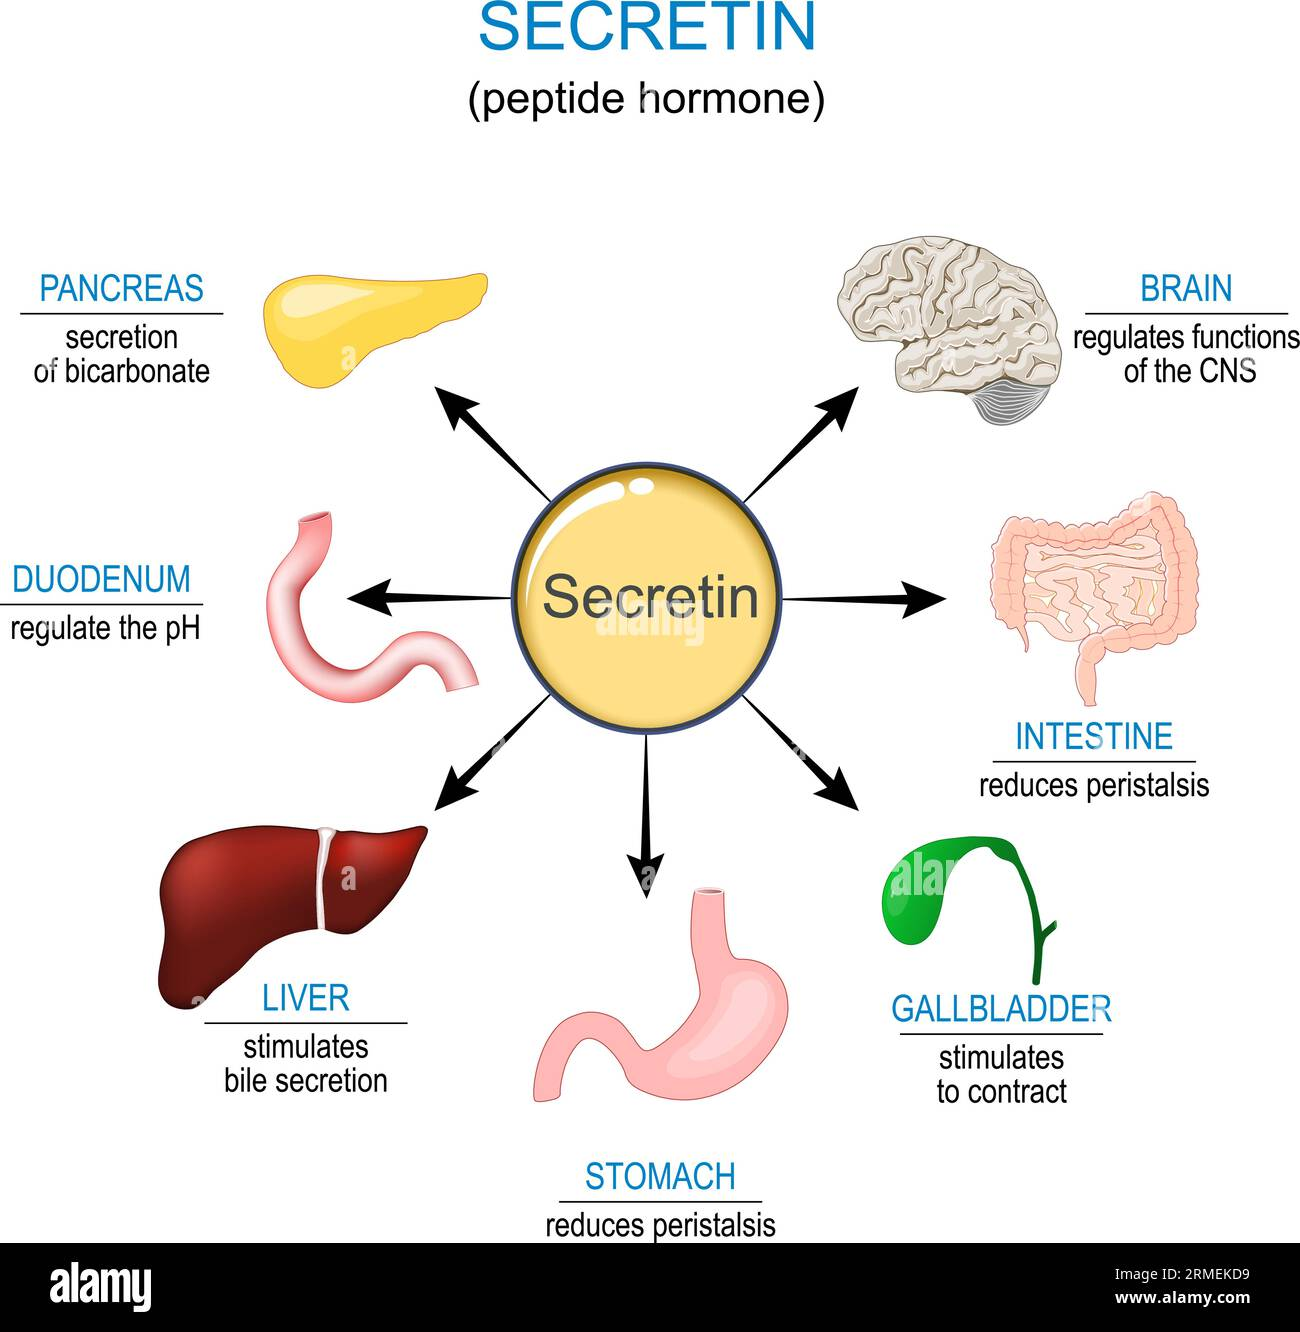 <p>☆ Secretin inhibits gastric contractions, stimulates the secretion of bicarbonate (HCO3-) and water from the gallbladder, and increases bicarbonate secretion from the pancreatic duct cells.</p>